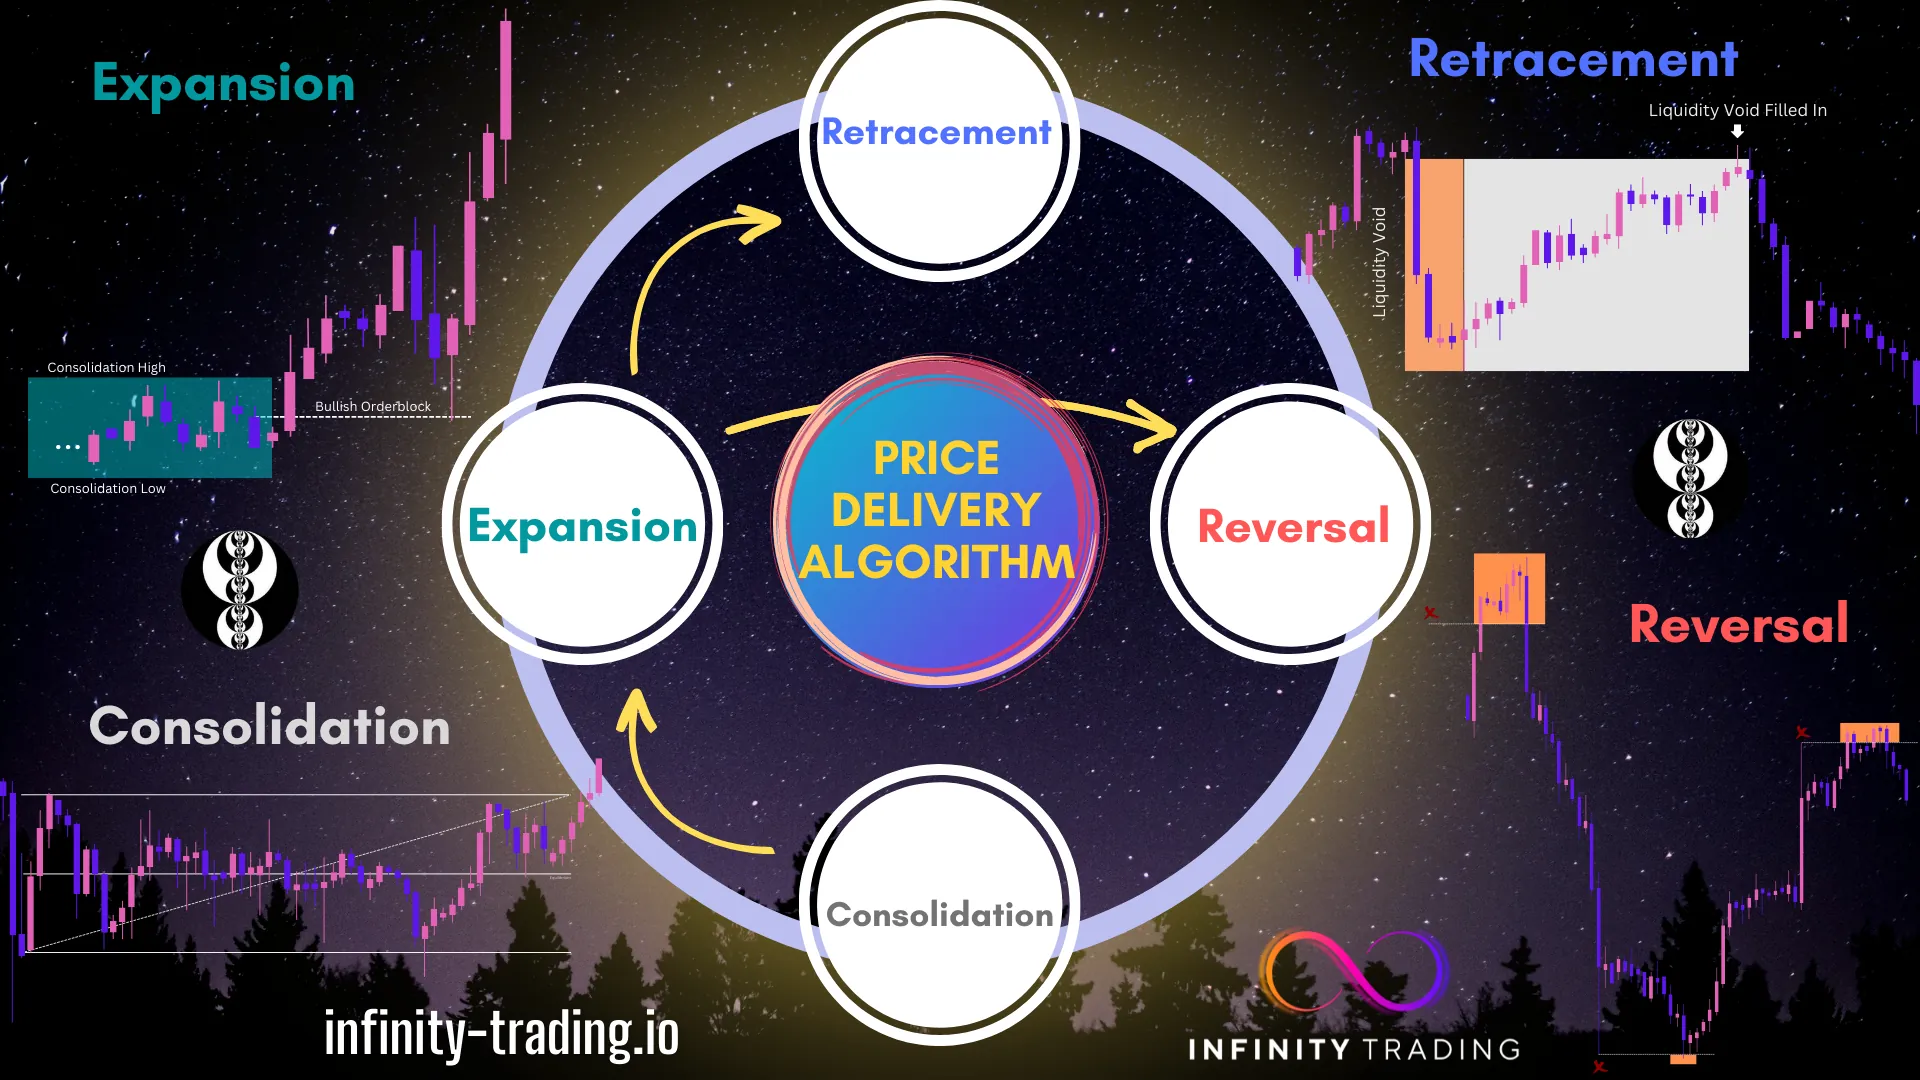 ICT Price Delivery Algorithm Phases Expansion Consolidation Retracement Reversal